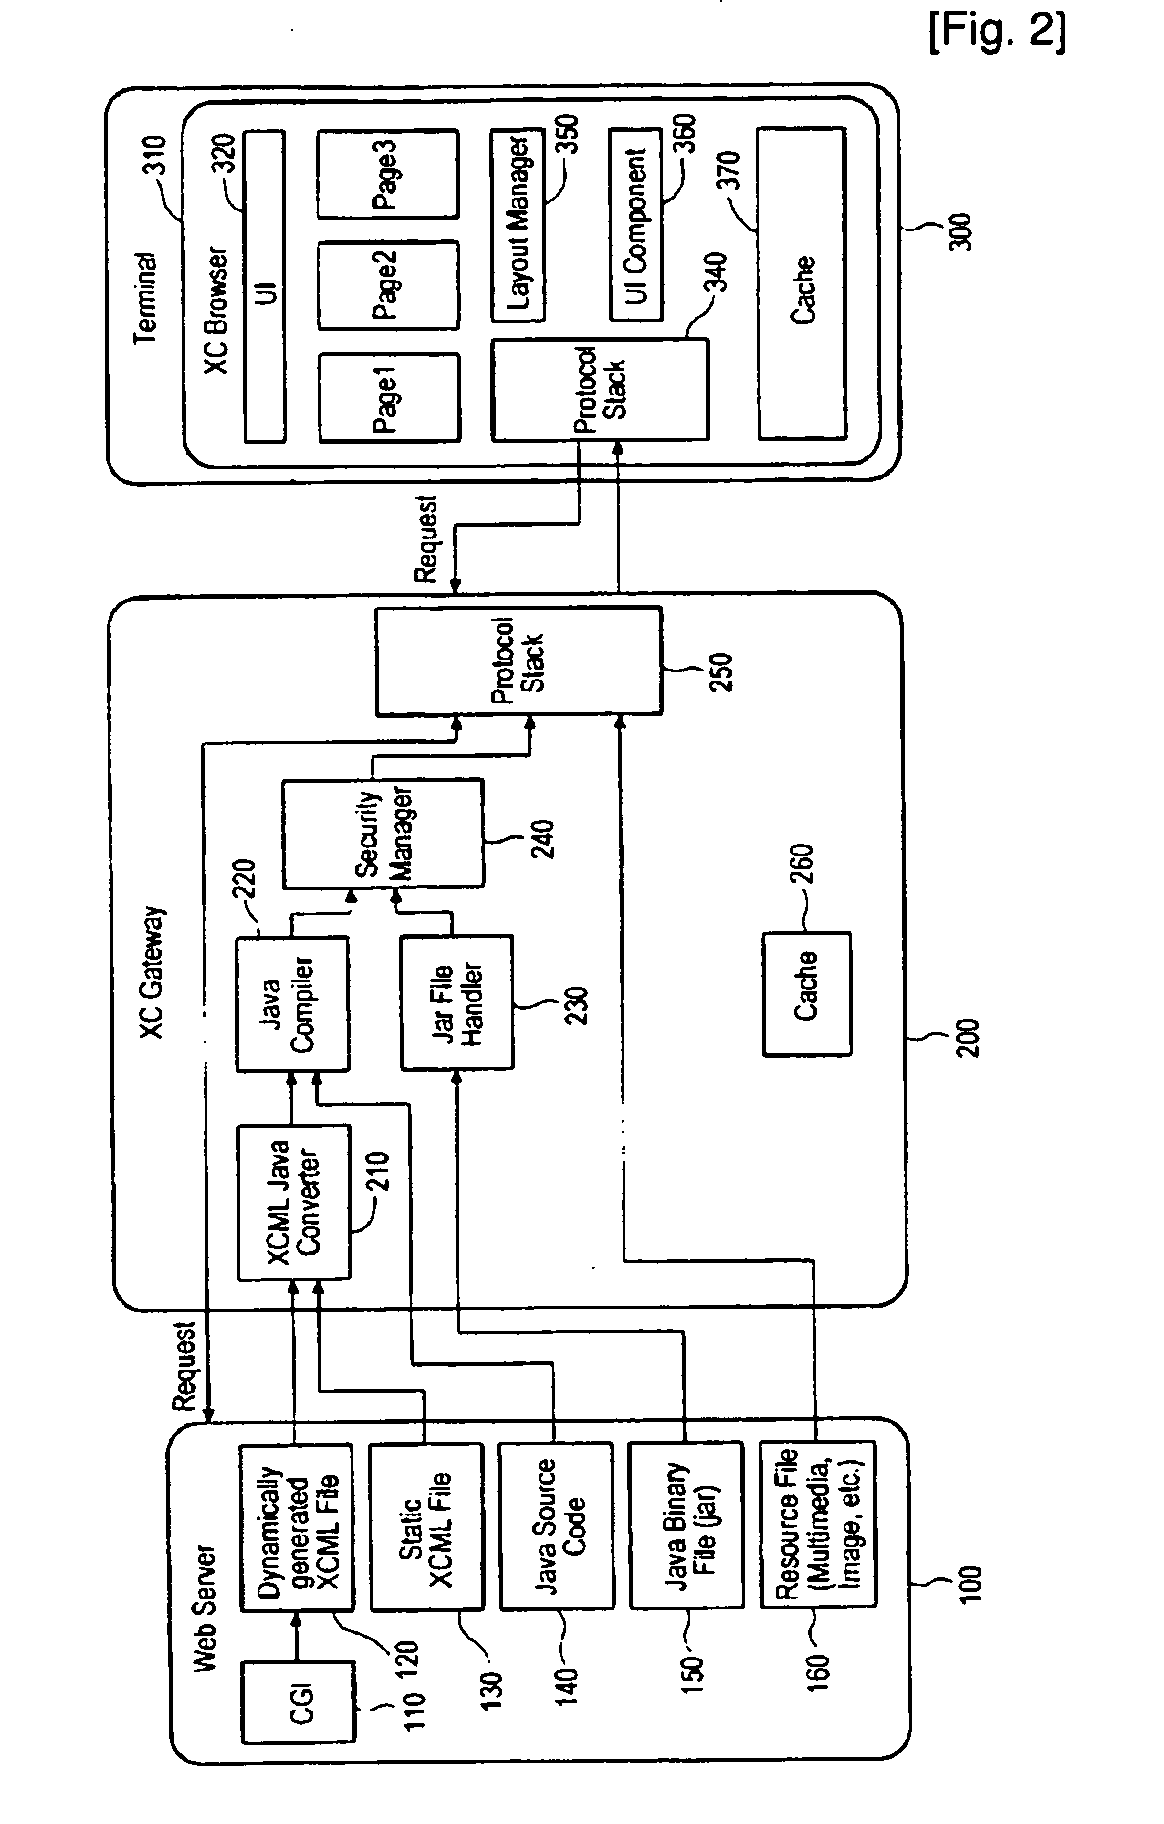 System and method for providing and handling executable web content